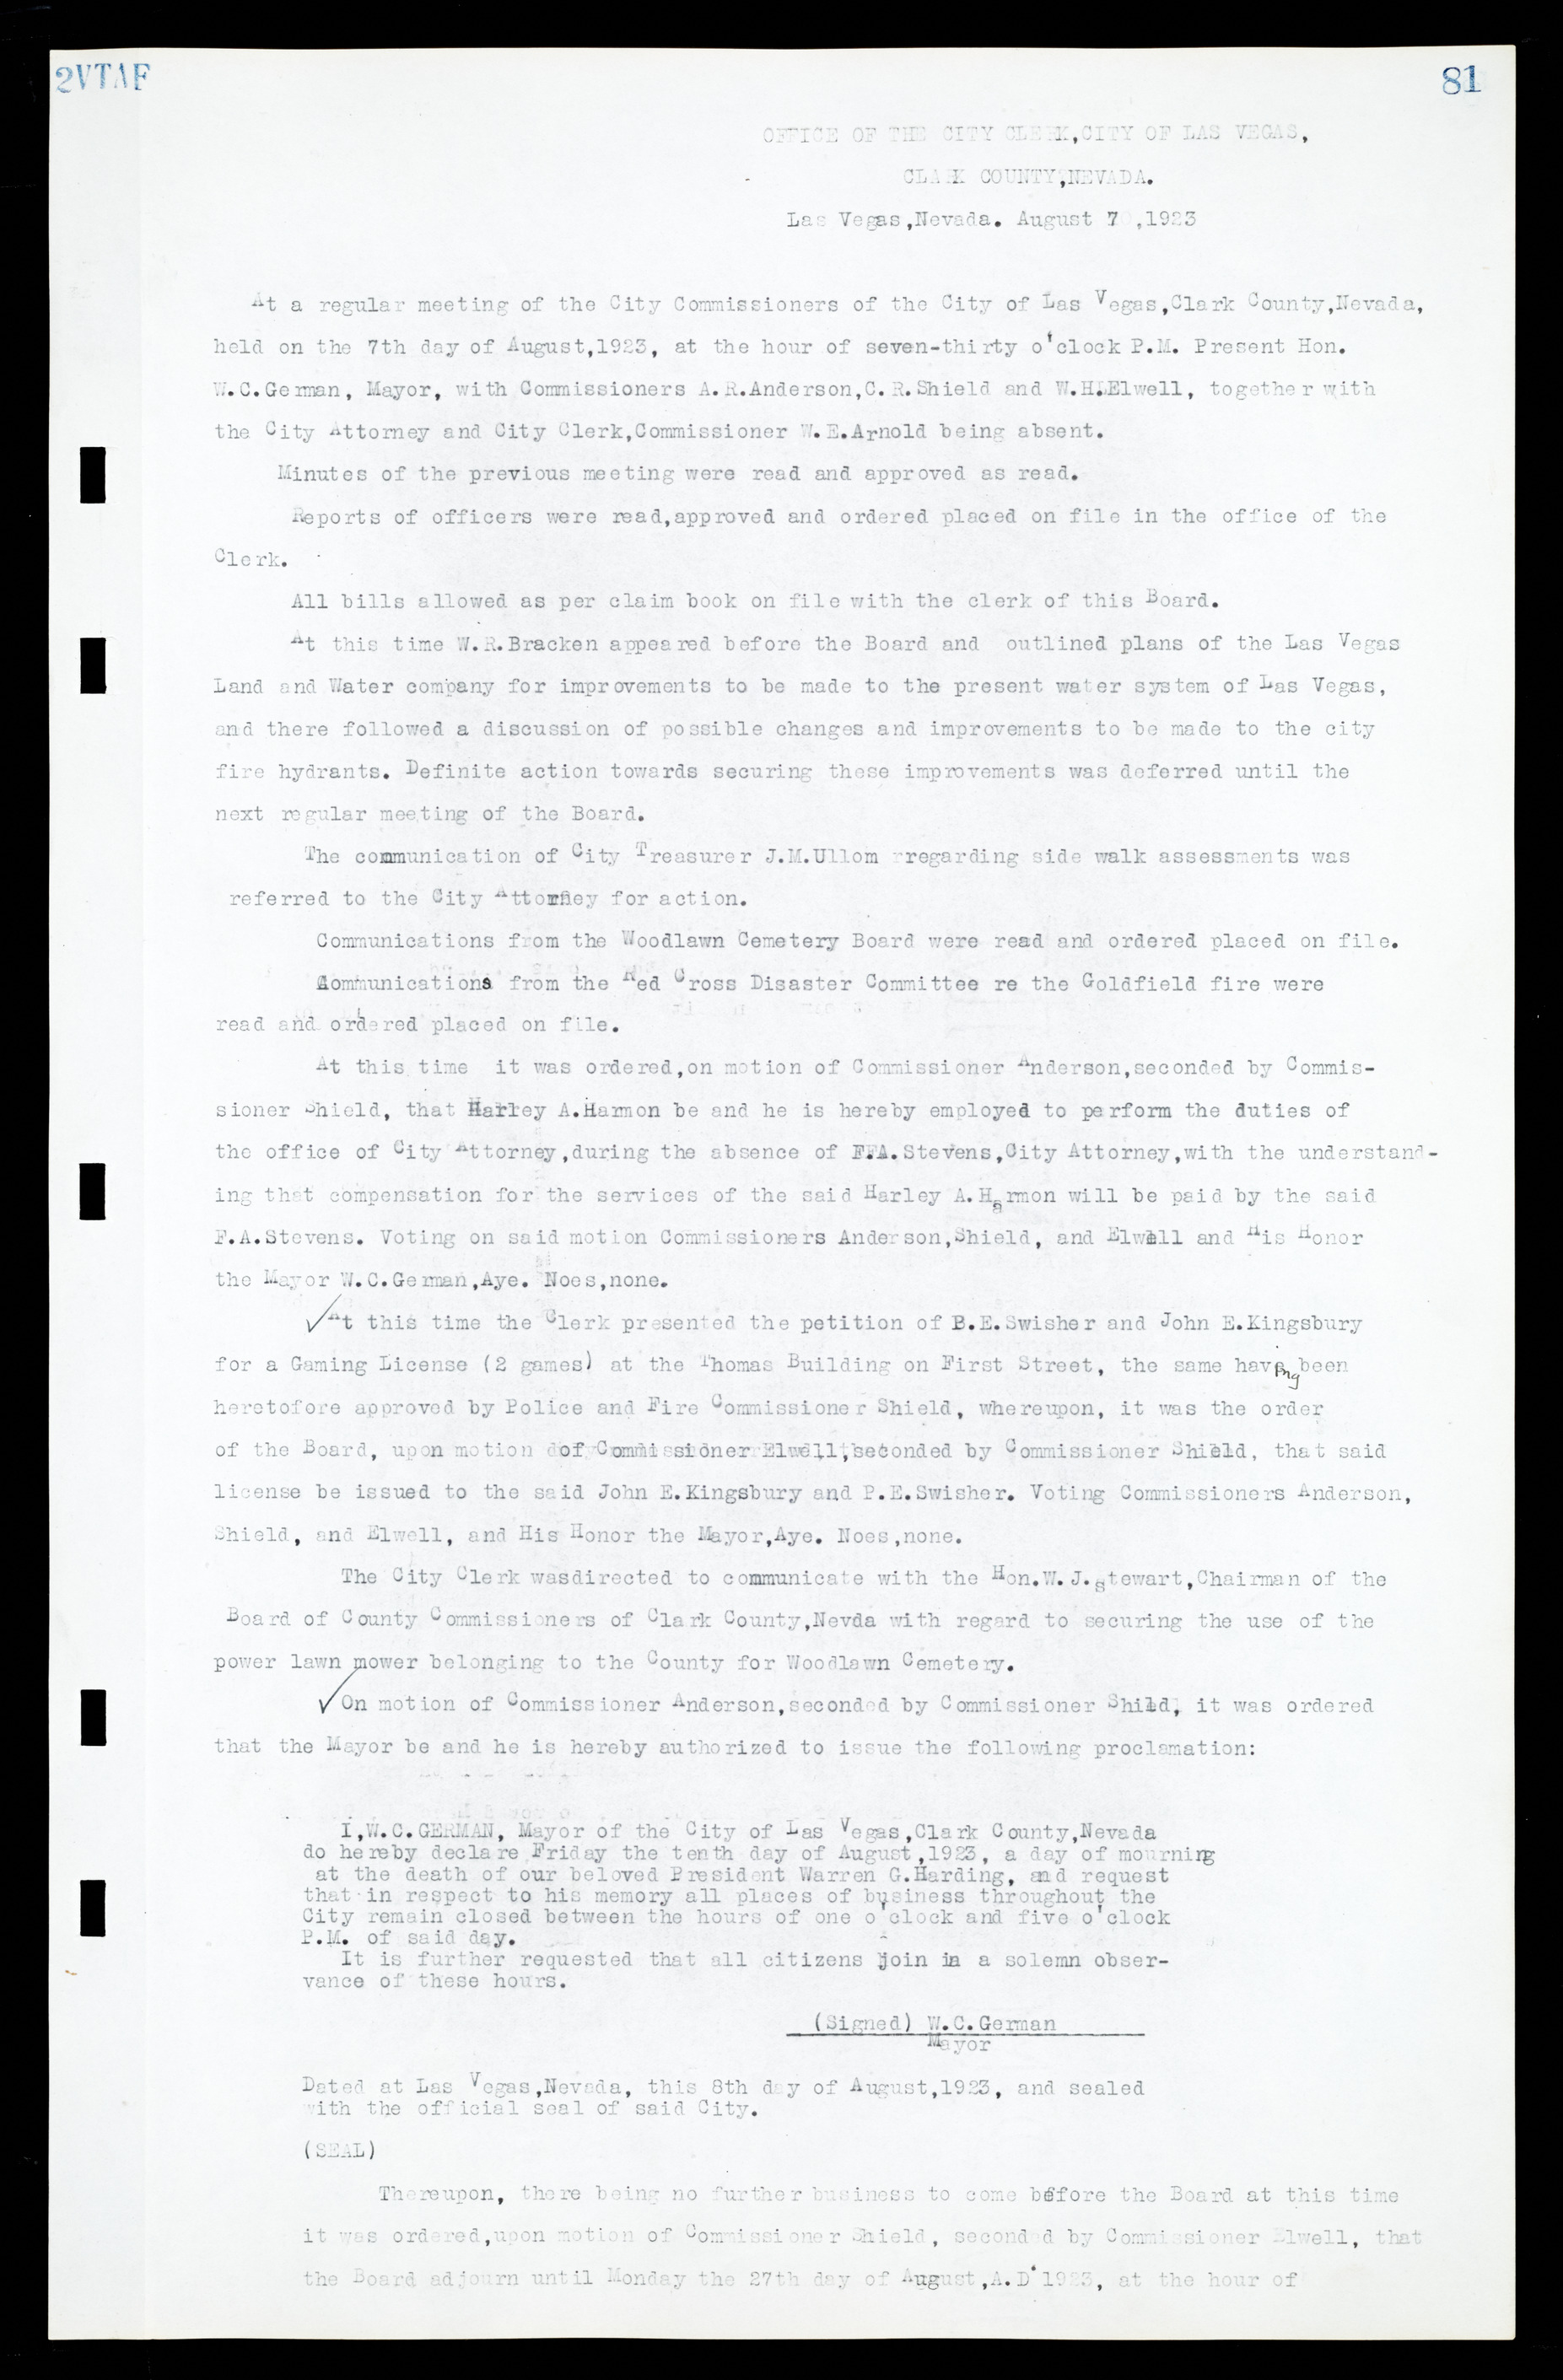 Las Vegas City Commission Minutes, March 1, 1922 to May 10, 1929, lvc000002-88